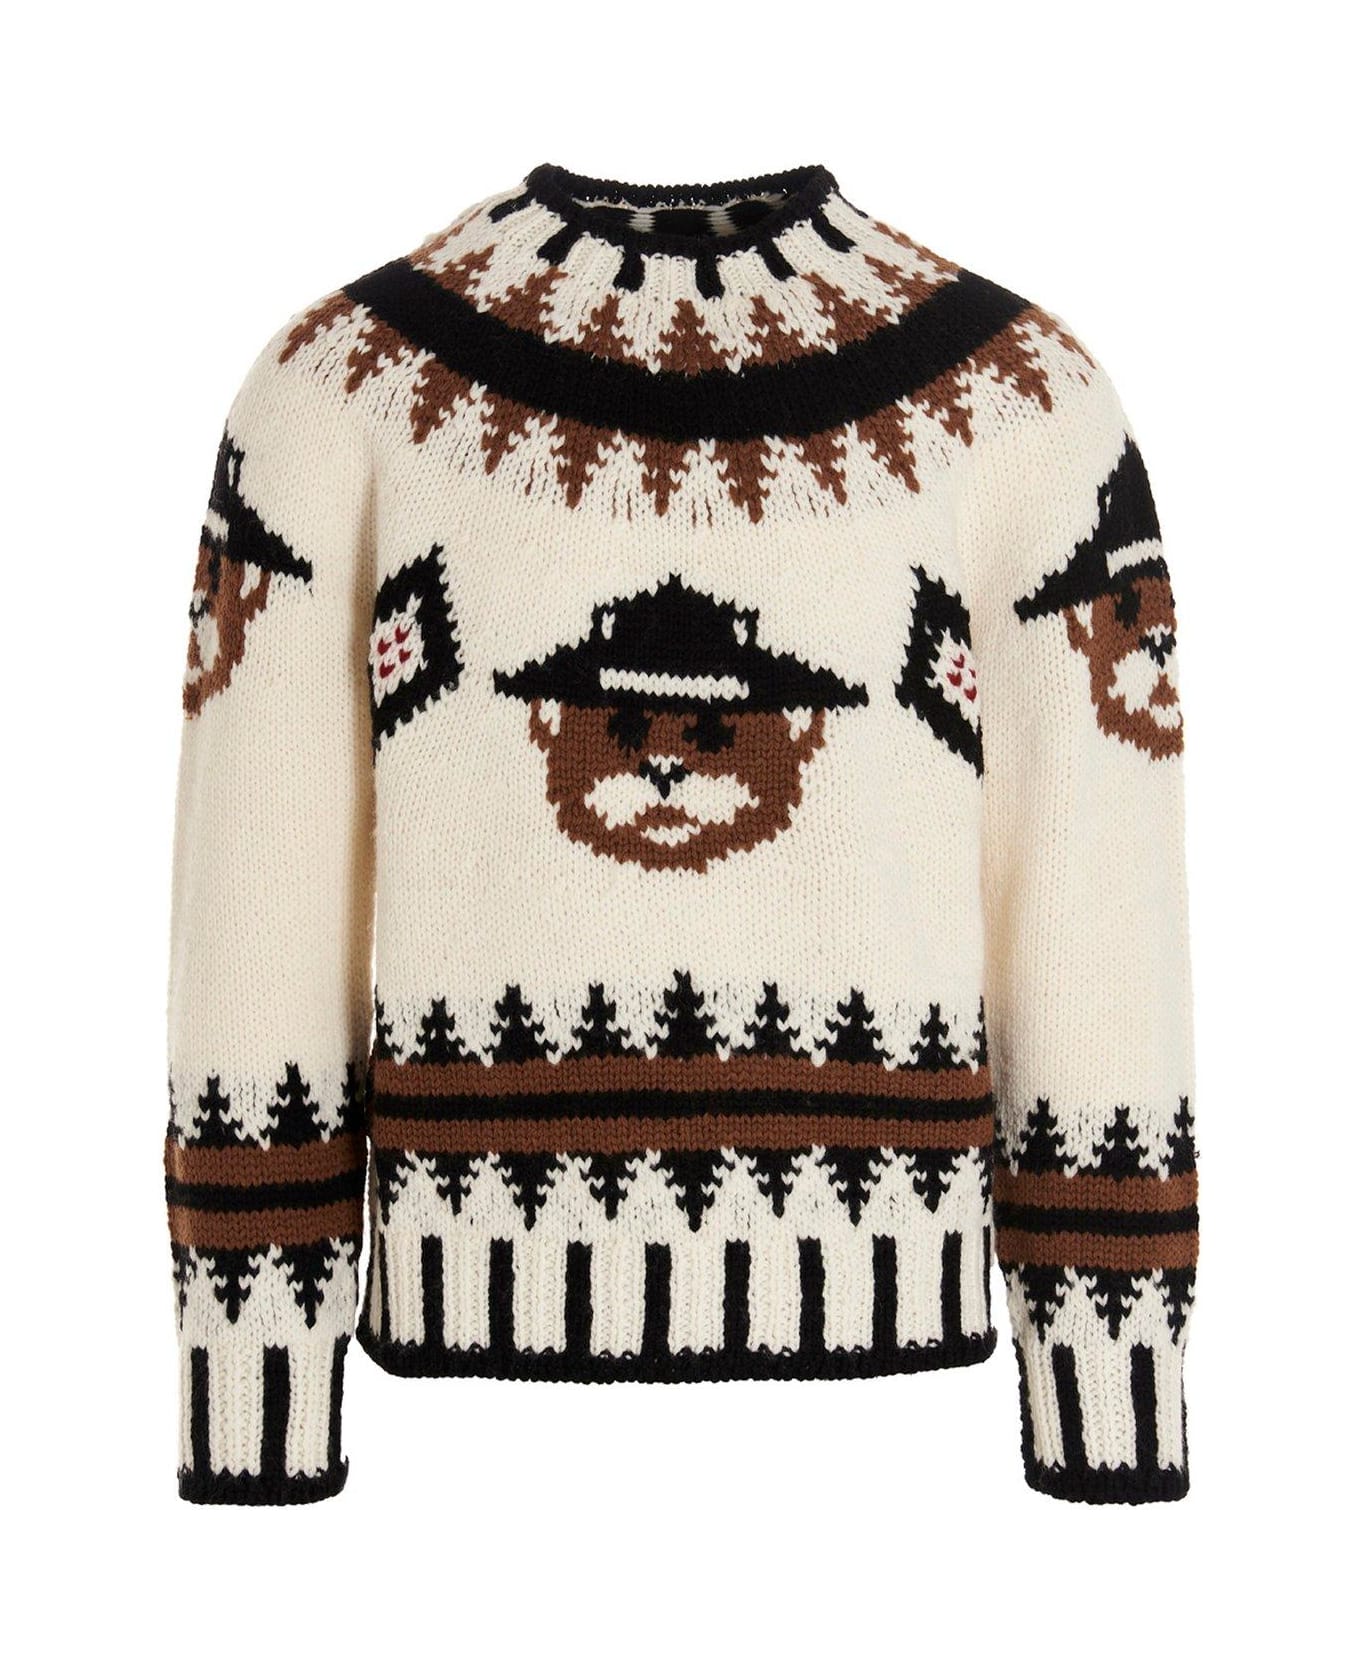 Dsquared2 Teddy Bear Intarsia Knitted Jumper - White